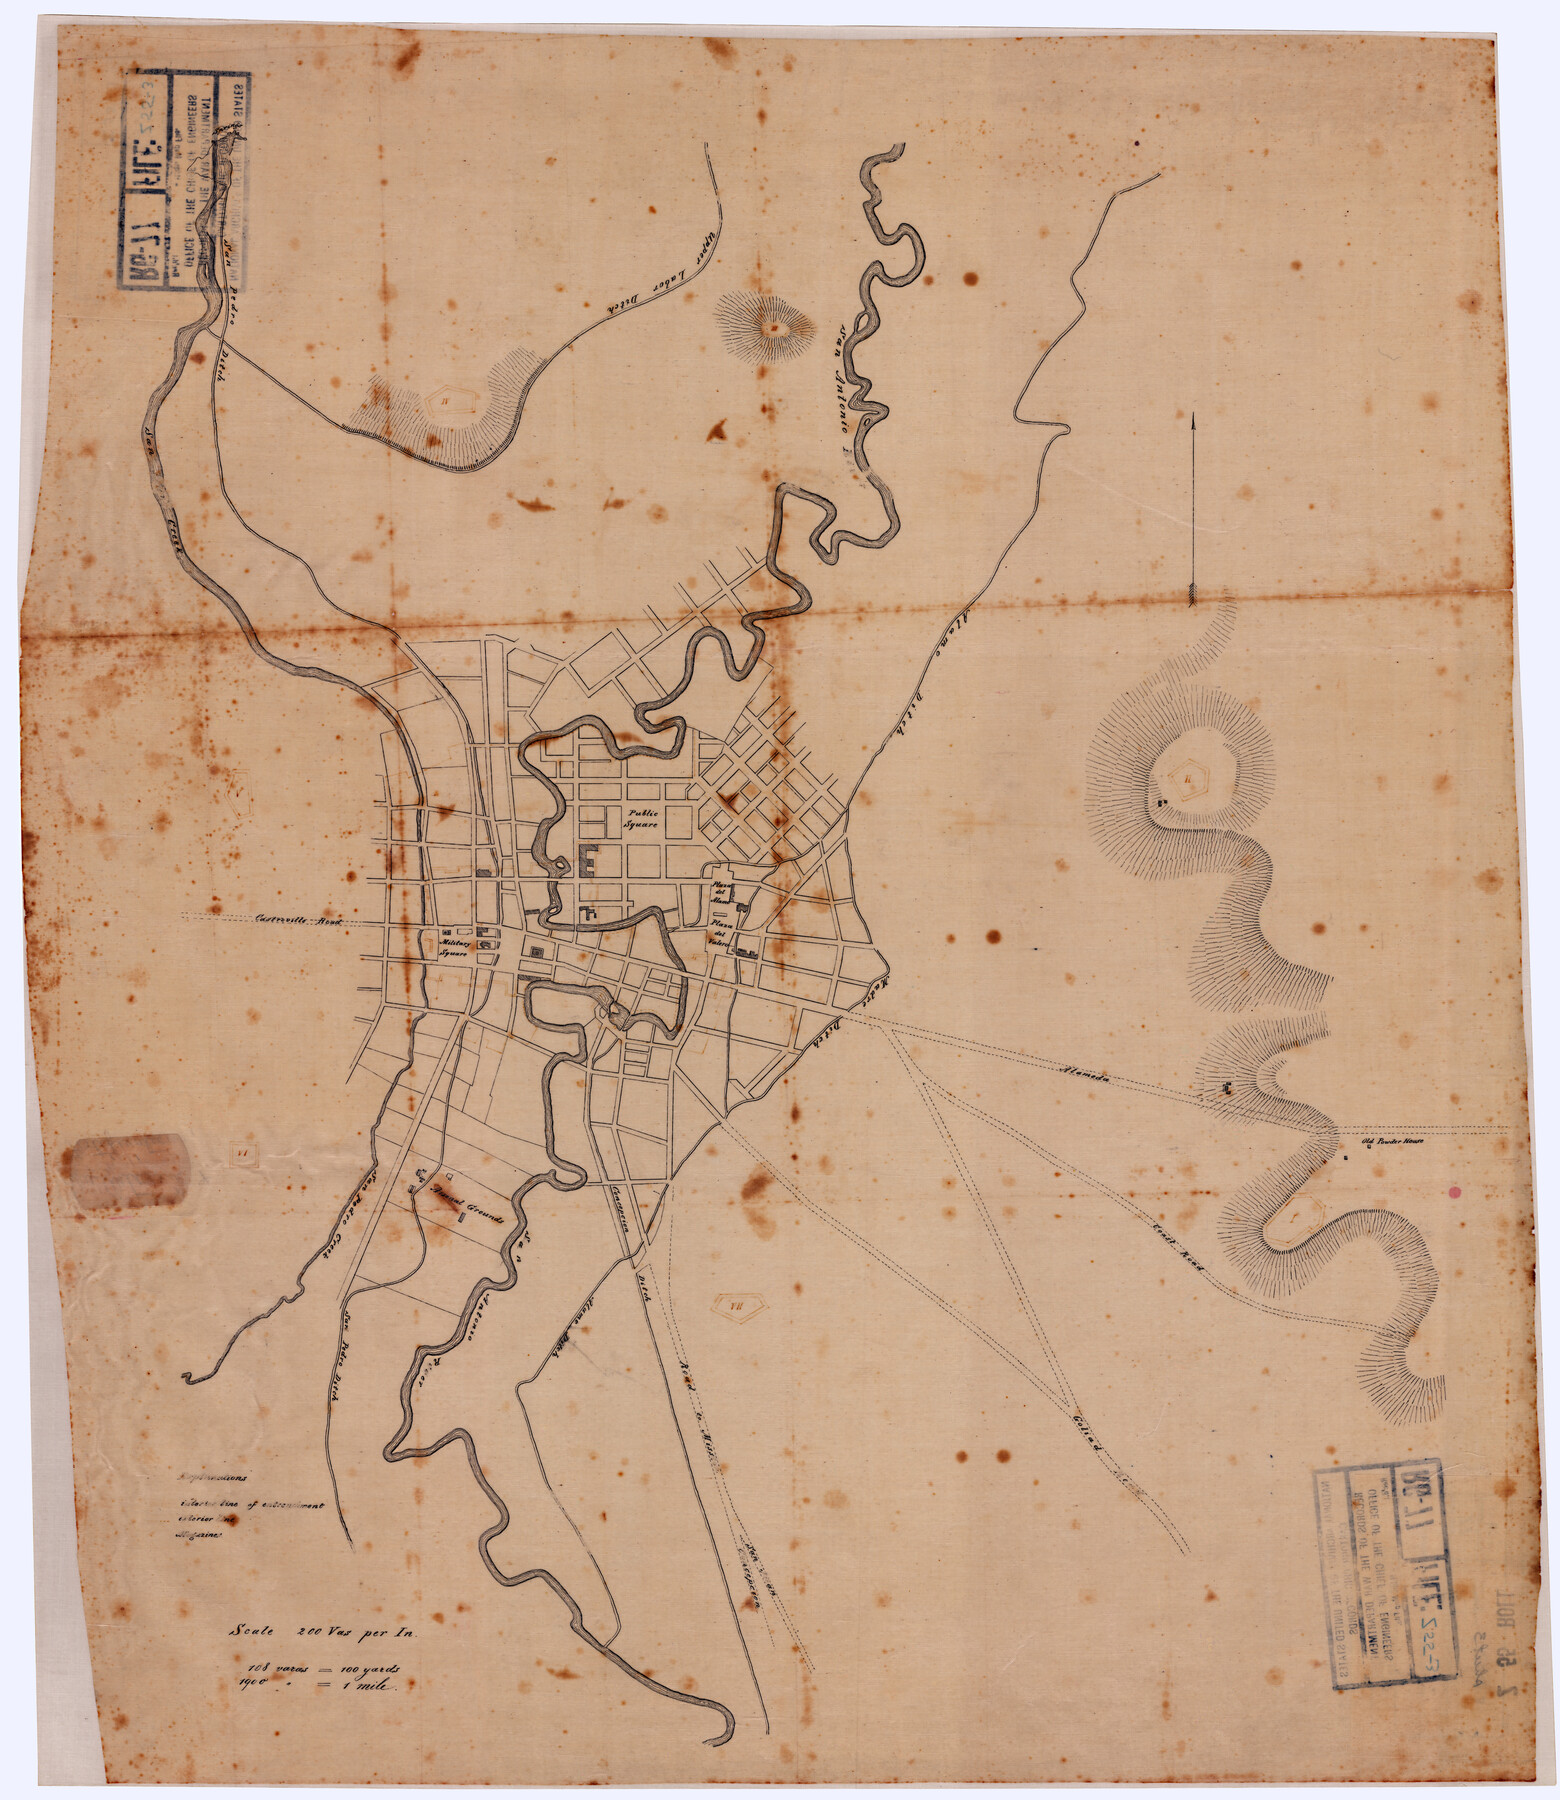 88603, [Map of Area near Alamo showing proposed fortifications], National Archives Digital Map Collection